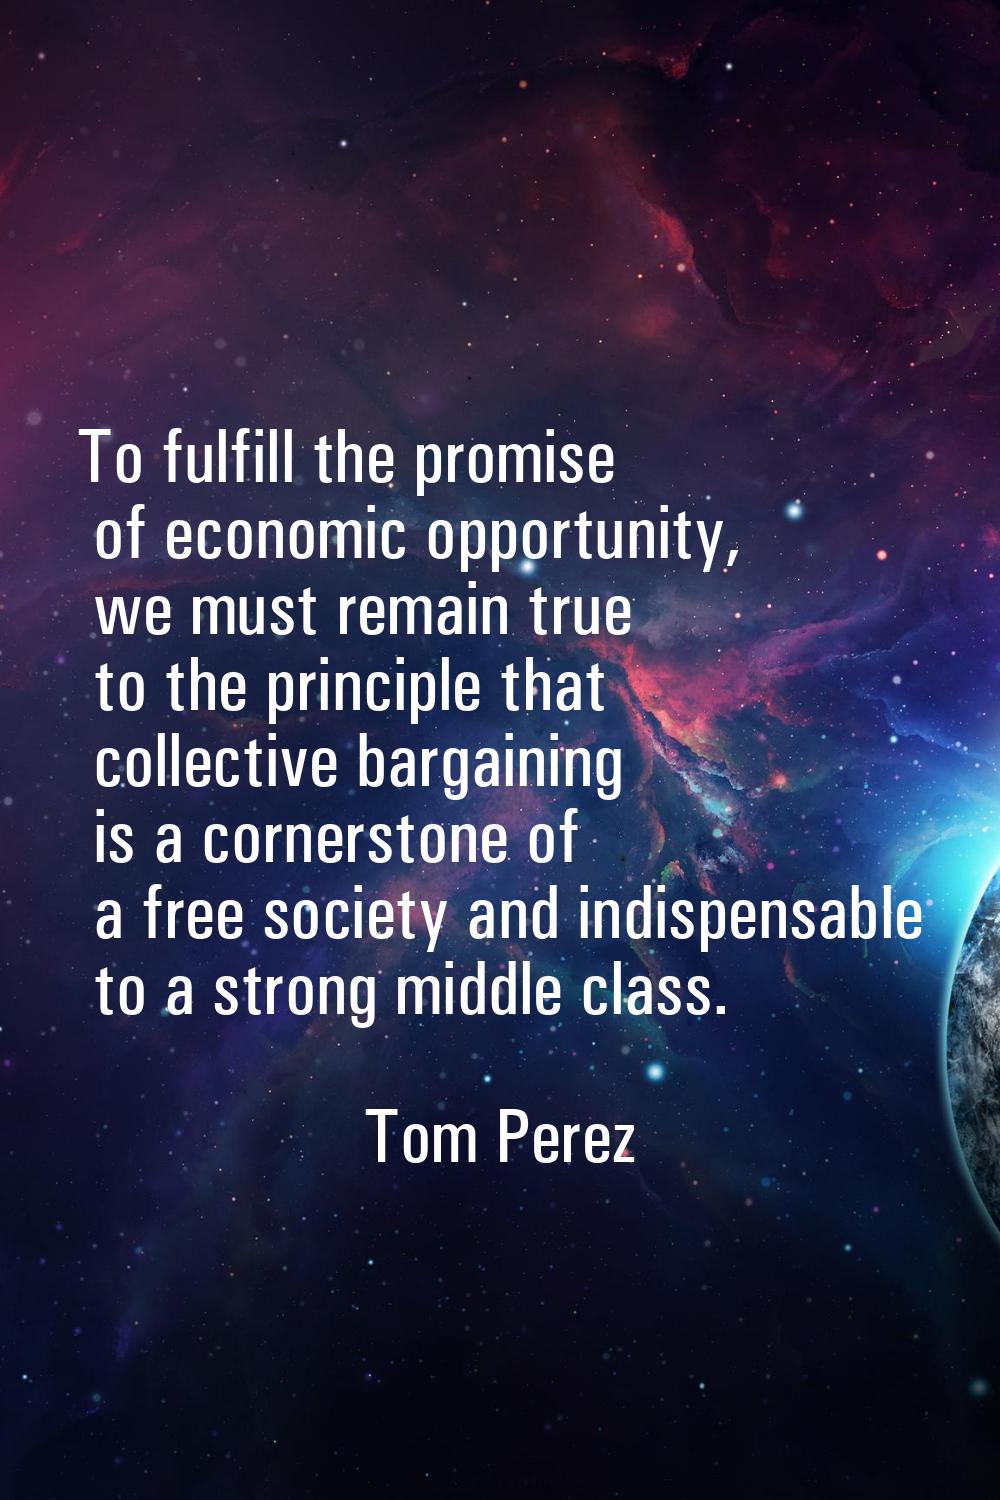 To fulfill the promise of economic opportunity, we must remain true to the principle that collectiv